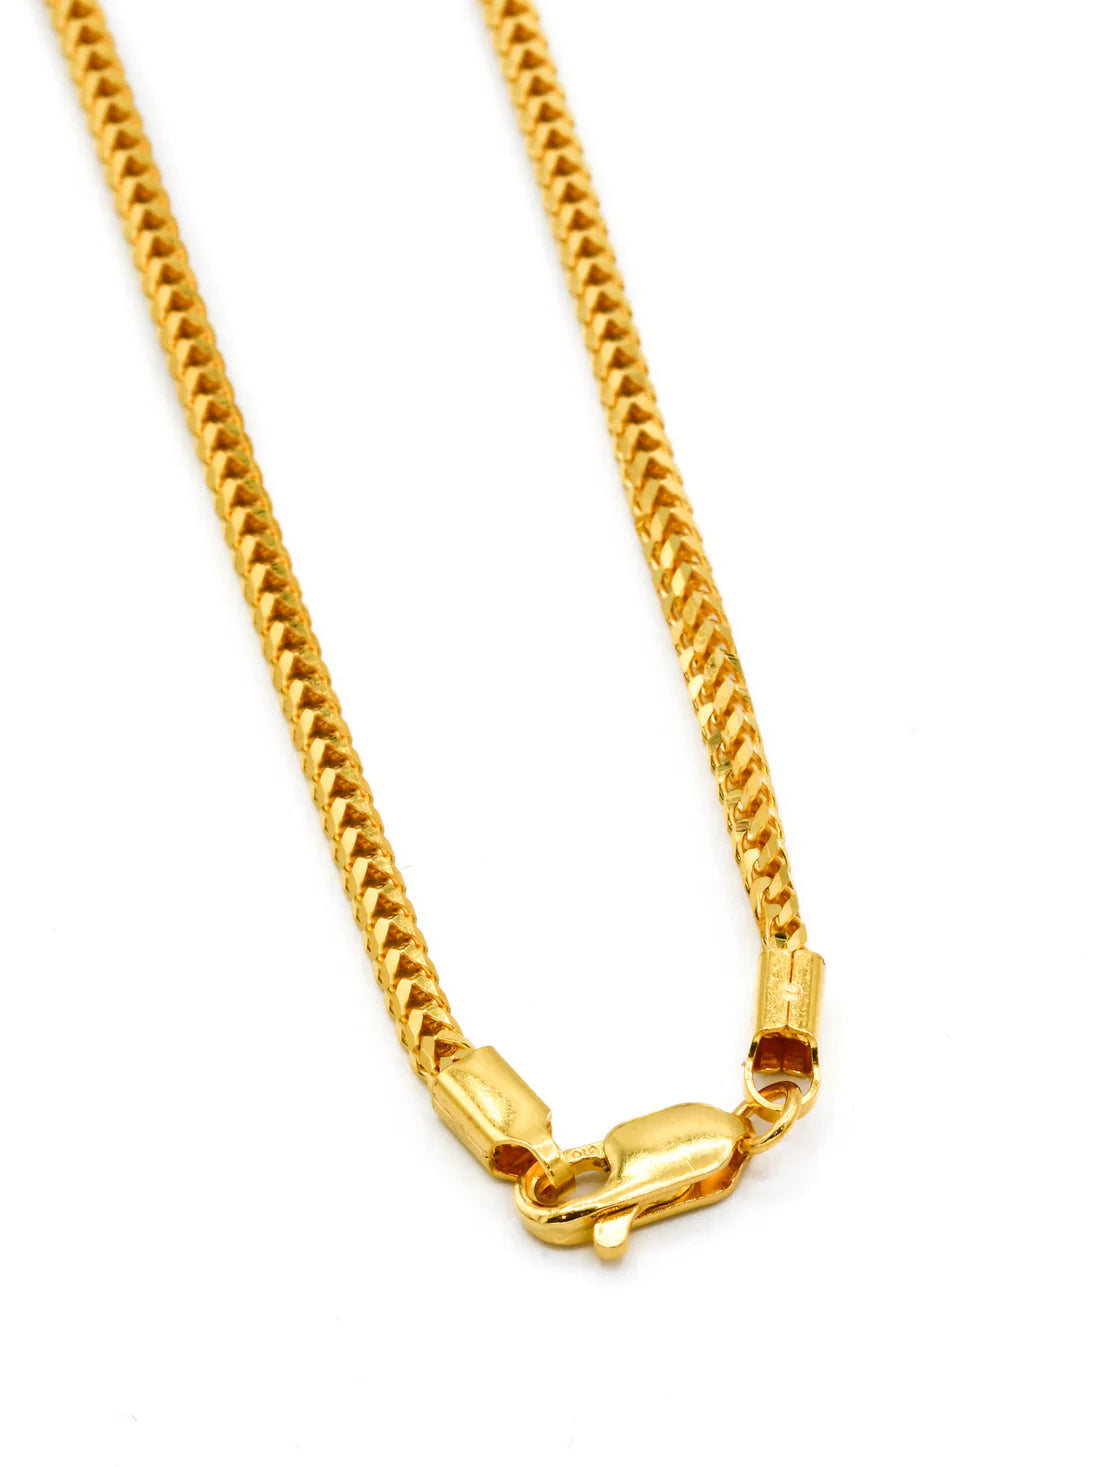 22ct Gold Fox Tail Chain - Roop Darshan